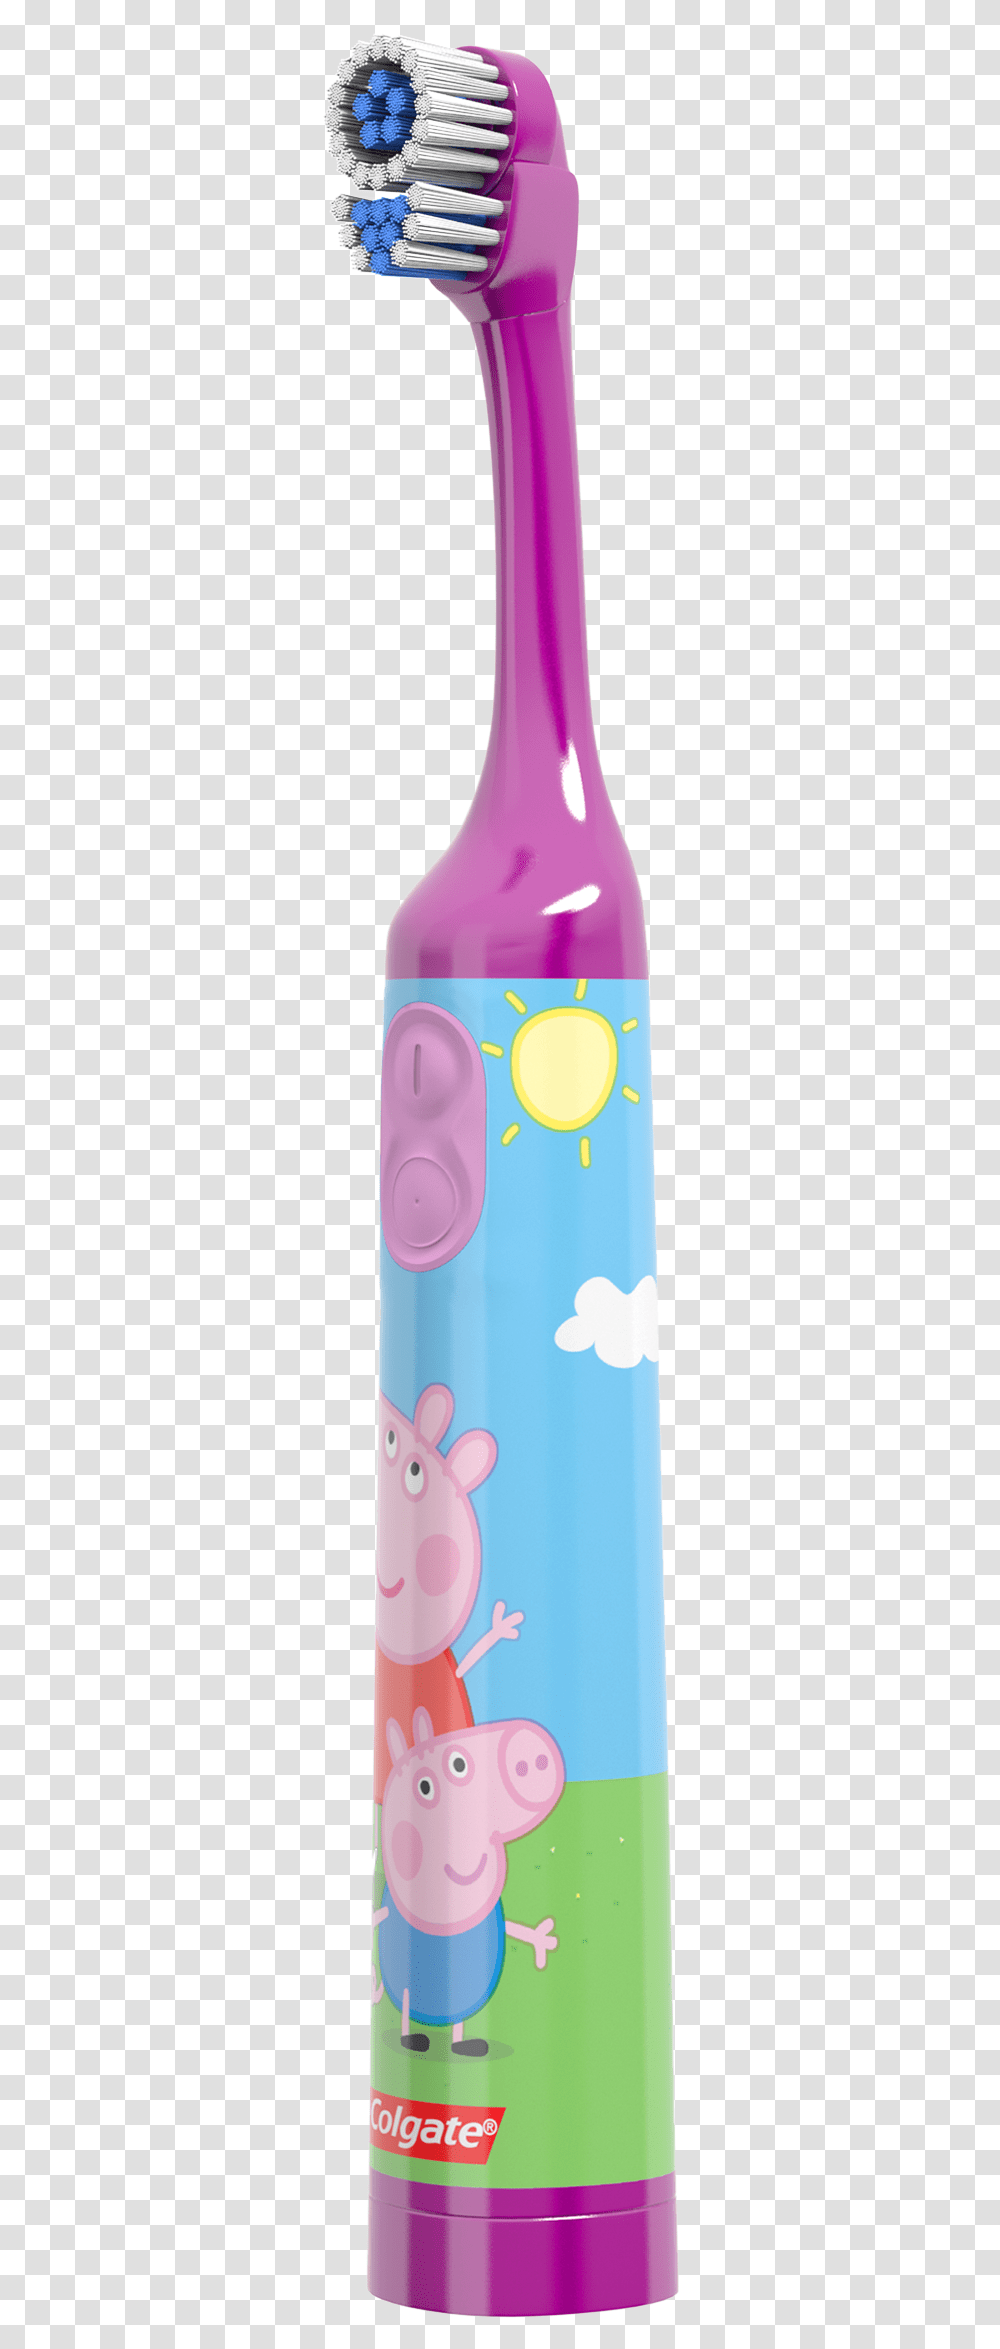 Electric Peppa Pig Toothbrush, Bottle, Water Bottle Transparent Png